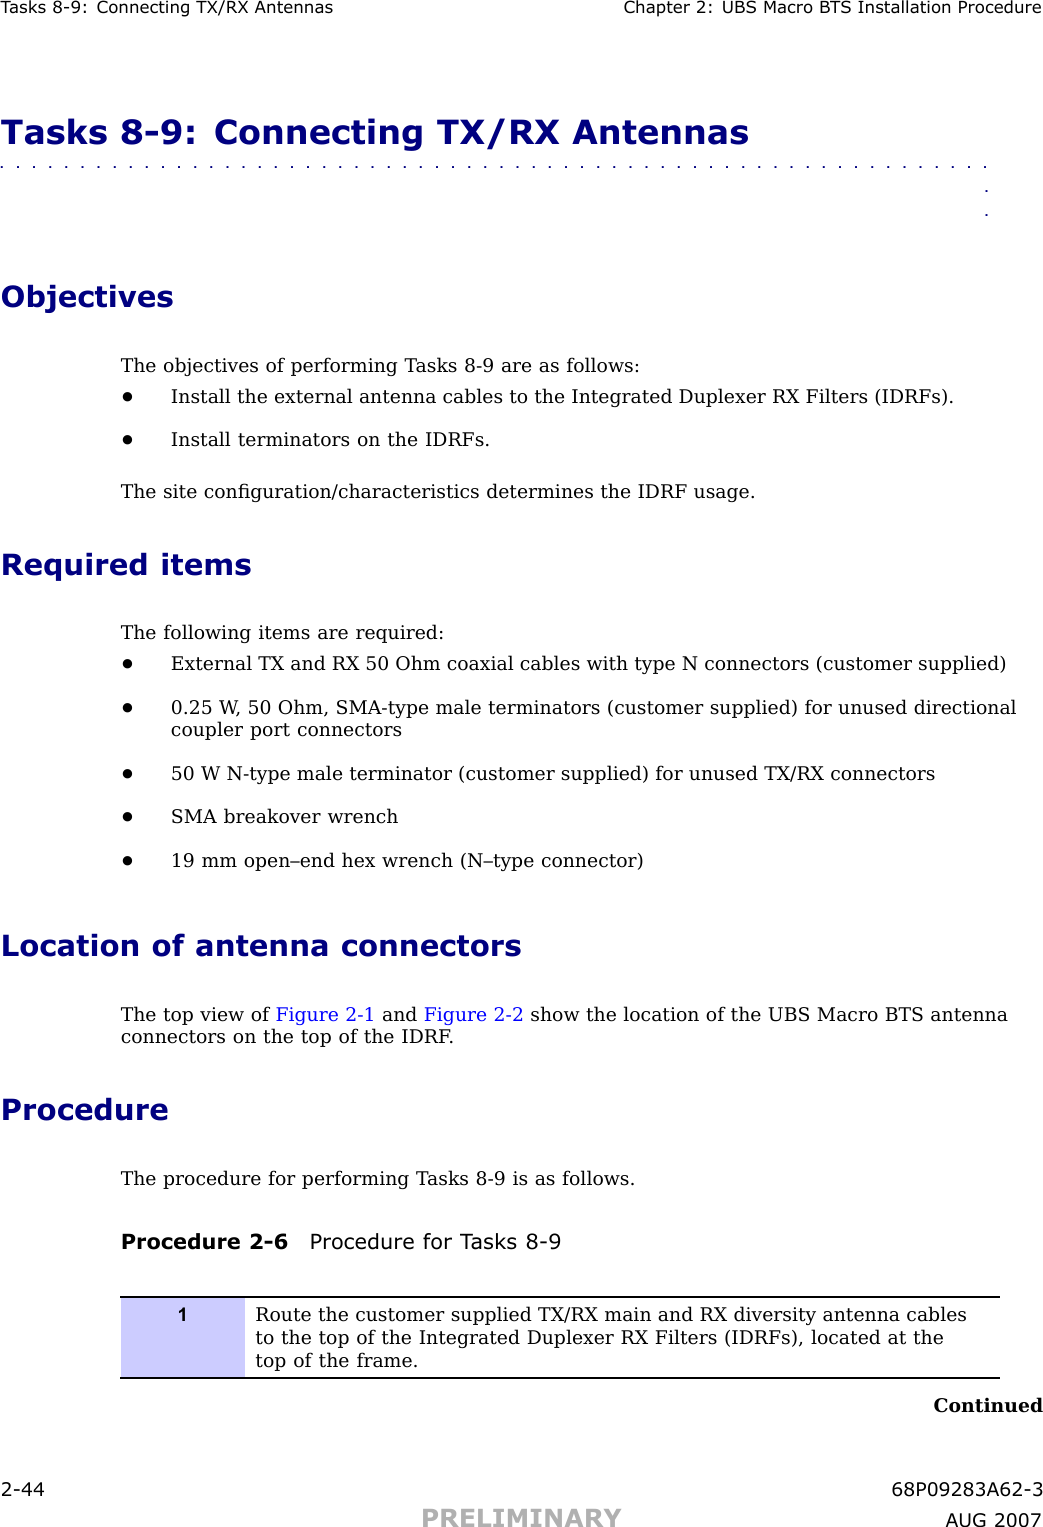 T asks 8 -9: Connecting TX/RX Antennas Chapter 2: UBS Macro B T S Installation ProcedureTasks 8 -9: Connecting TX/RX Antennas■■■■■■■■■■■■■■■■■■■■■■■■■■■■■■■■■■■■■■■■■■■■■■■■■■■■■■■■■■■■■■■■ObjectivesThe objectives of performing T asks 8 -9 are as follows:•Install the external antenna cables to the Integrated Duplexer RX Filters (IDRFs).•Install terminators on the IDRFs.The site conﬁguration/characteristics determines the IDRF usage.Required itemsThe following items are required:•External TX and RX 50 Ohm coaxial cables with type N connectors (customer supplied)•0.25 W , 50 Ohm, SMA -type male terminators (customer supplied) for unused directionalcoupler port connectors•50 W N -type male terminator (customer supplied) for unused TX/RX connectors•SMA breakover wrench•19 mm open–end hex wrench (N–type connector)Location of antenna connectorsThe top view of Figure 2 -1 and Figure 2 -2 show the location of the UBS Macro BTS antennaconnectors on the top of the IDRF .ProcedureThe procedure for performing T asks 8 -9 is as follows.Procedure 2 -6 Procedure for T asks 8 -91Route the customer supplied TX/RX main and RX diversity antenna cablesto the top of the Integrated Duplexer RX Filters (IDRFs), located at thetop of the frame.Continued2 -44 68P09283A62 -3PRELIMINARY A UG 2007